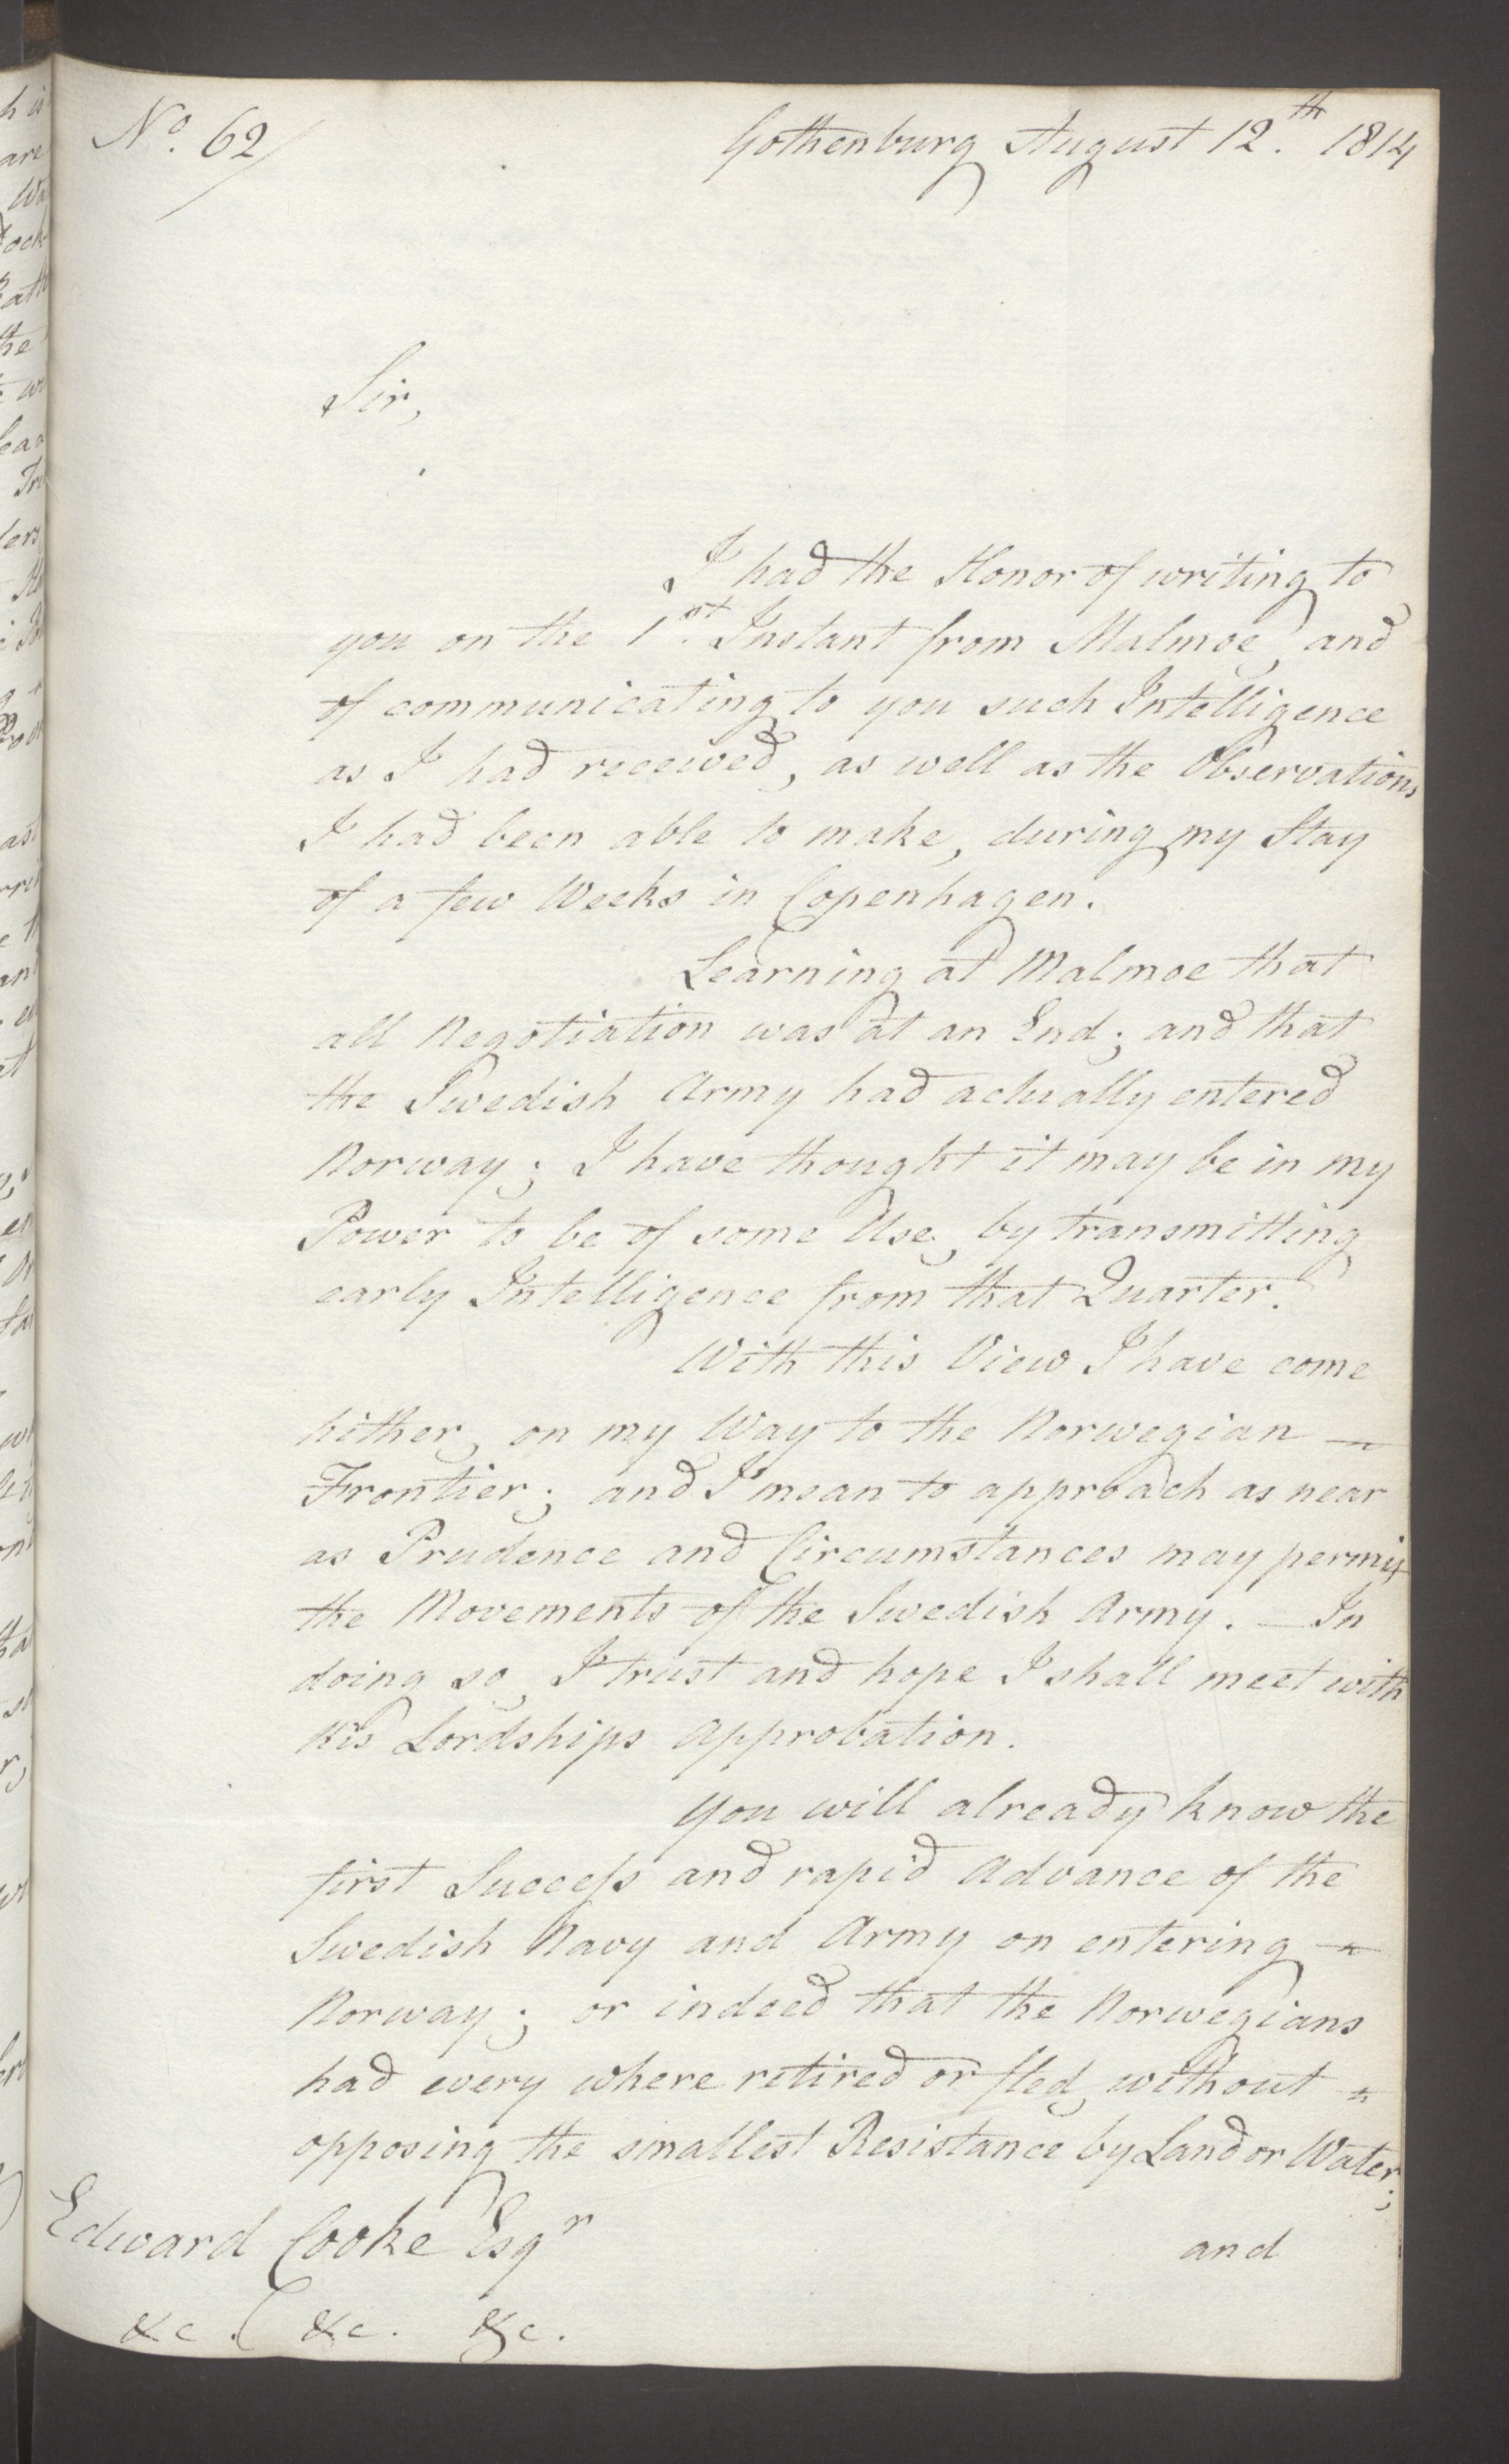 Foreign Office*, UKA/-/FO 38/16: Sir C. Gordon. Reports from Malmö, Jonkoping, and Helsingborg, 1814, p. 79